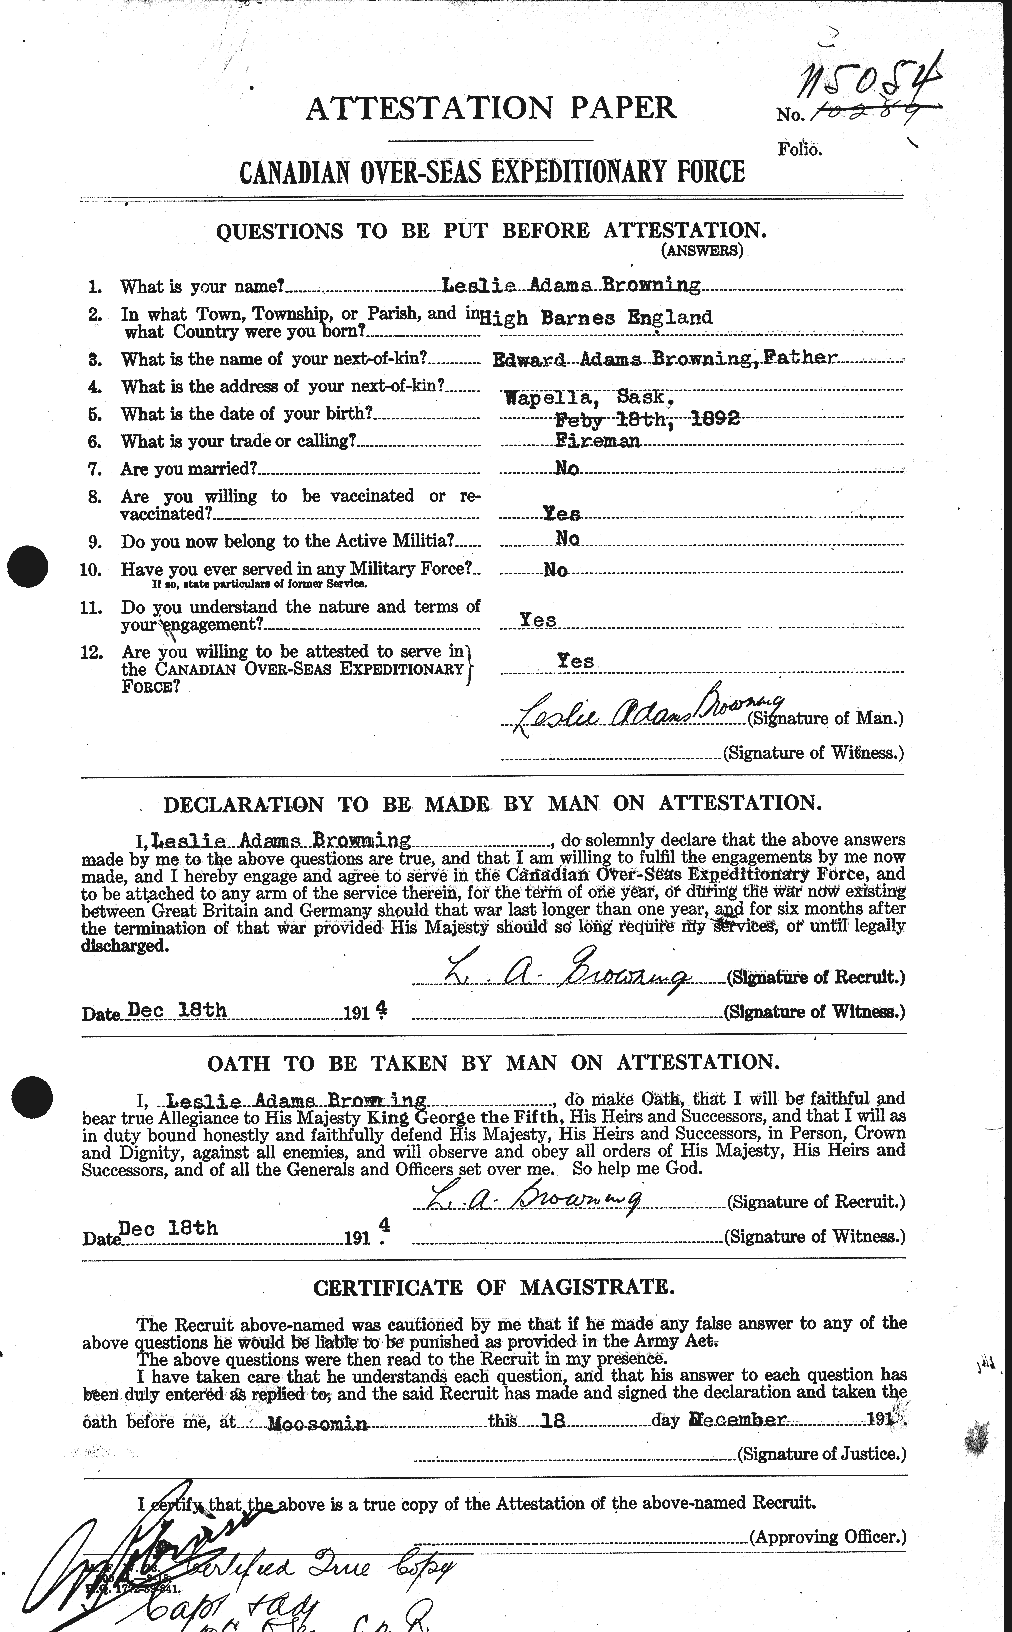 Personnel Records of the First World War - CEF 267516a